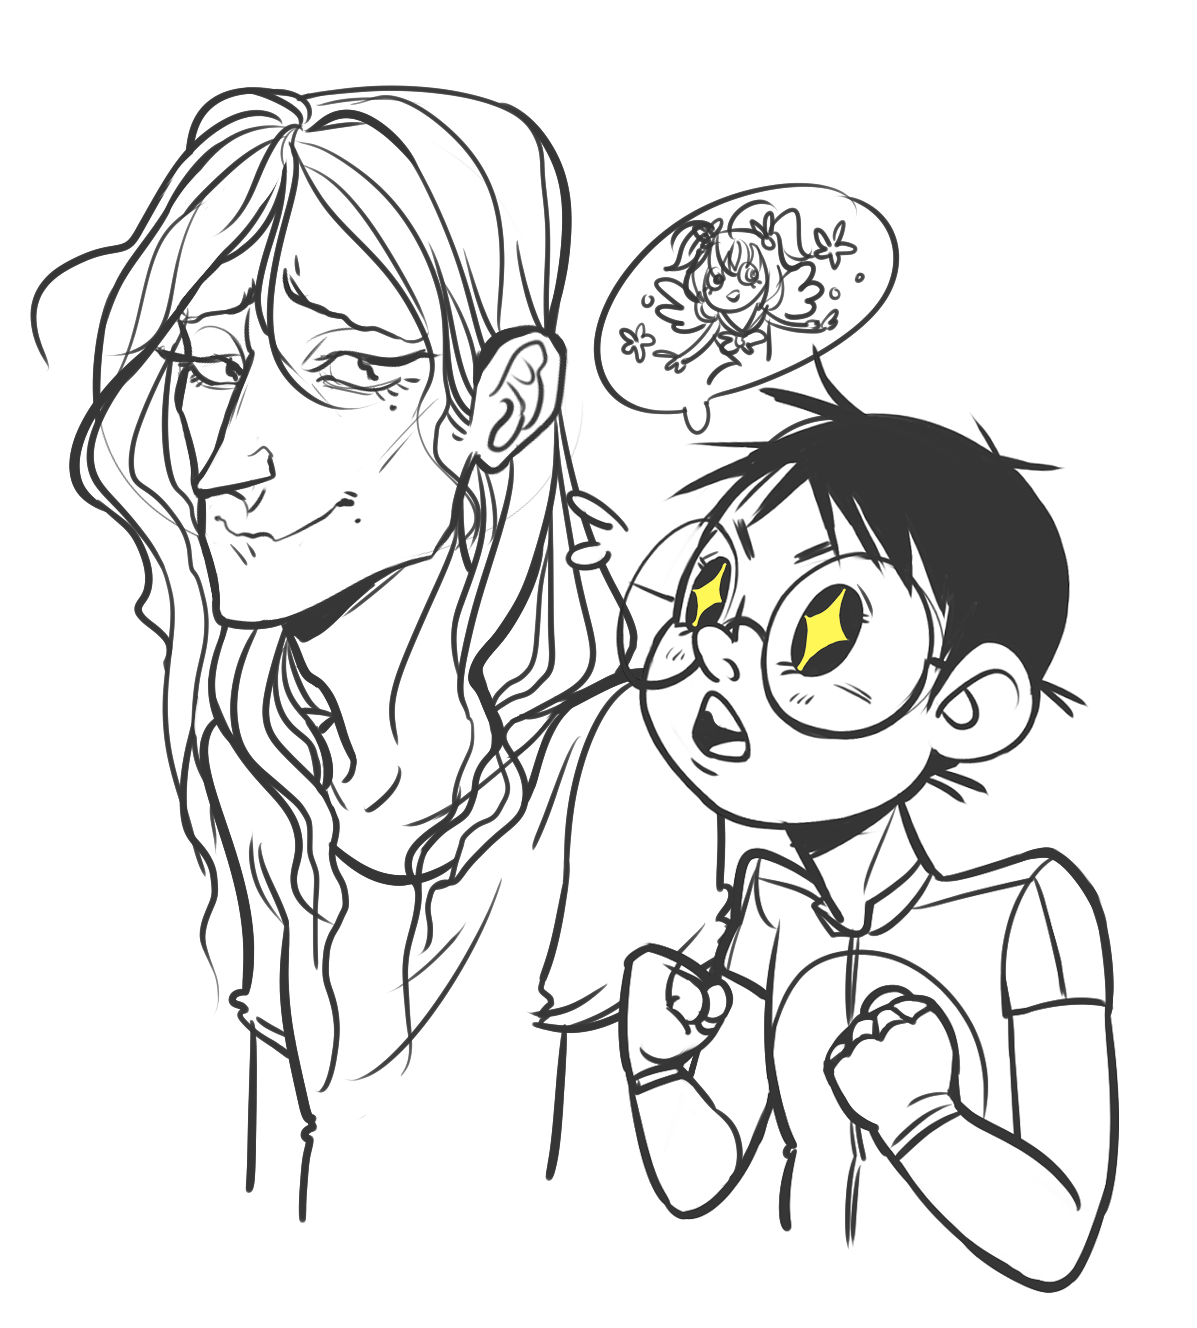 purmu:  more spider wife doodles feat. some other members of the nerd circus tadokoro’s